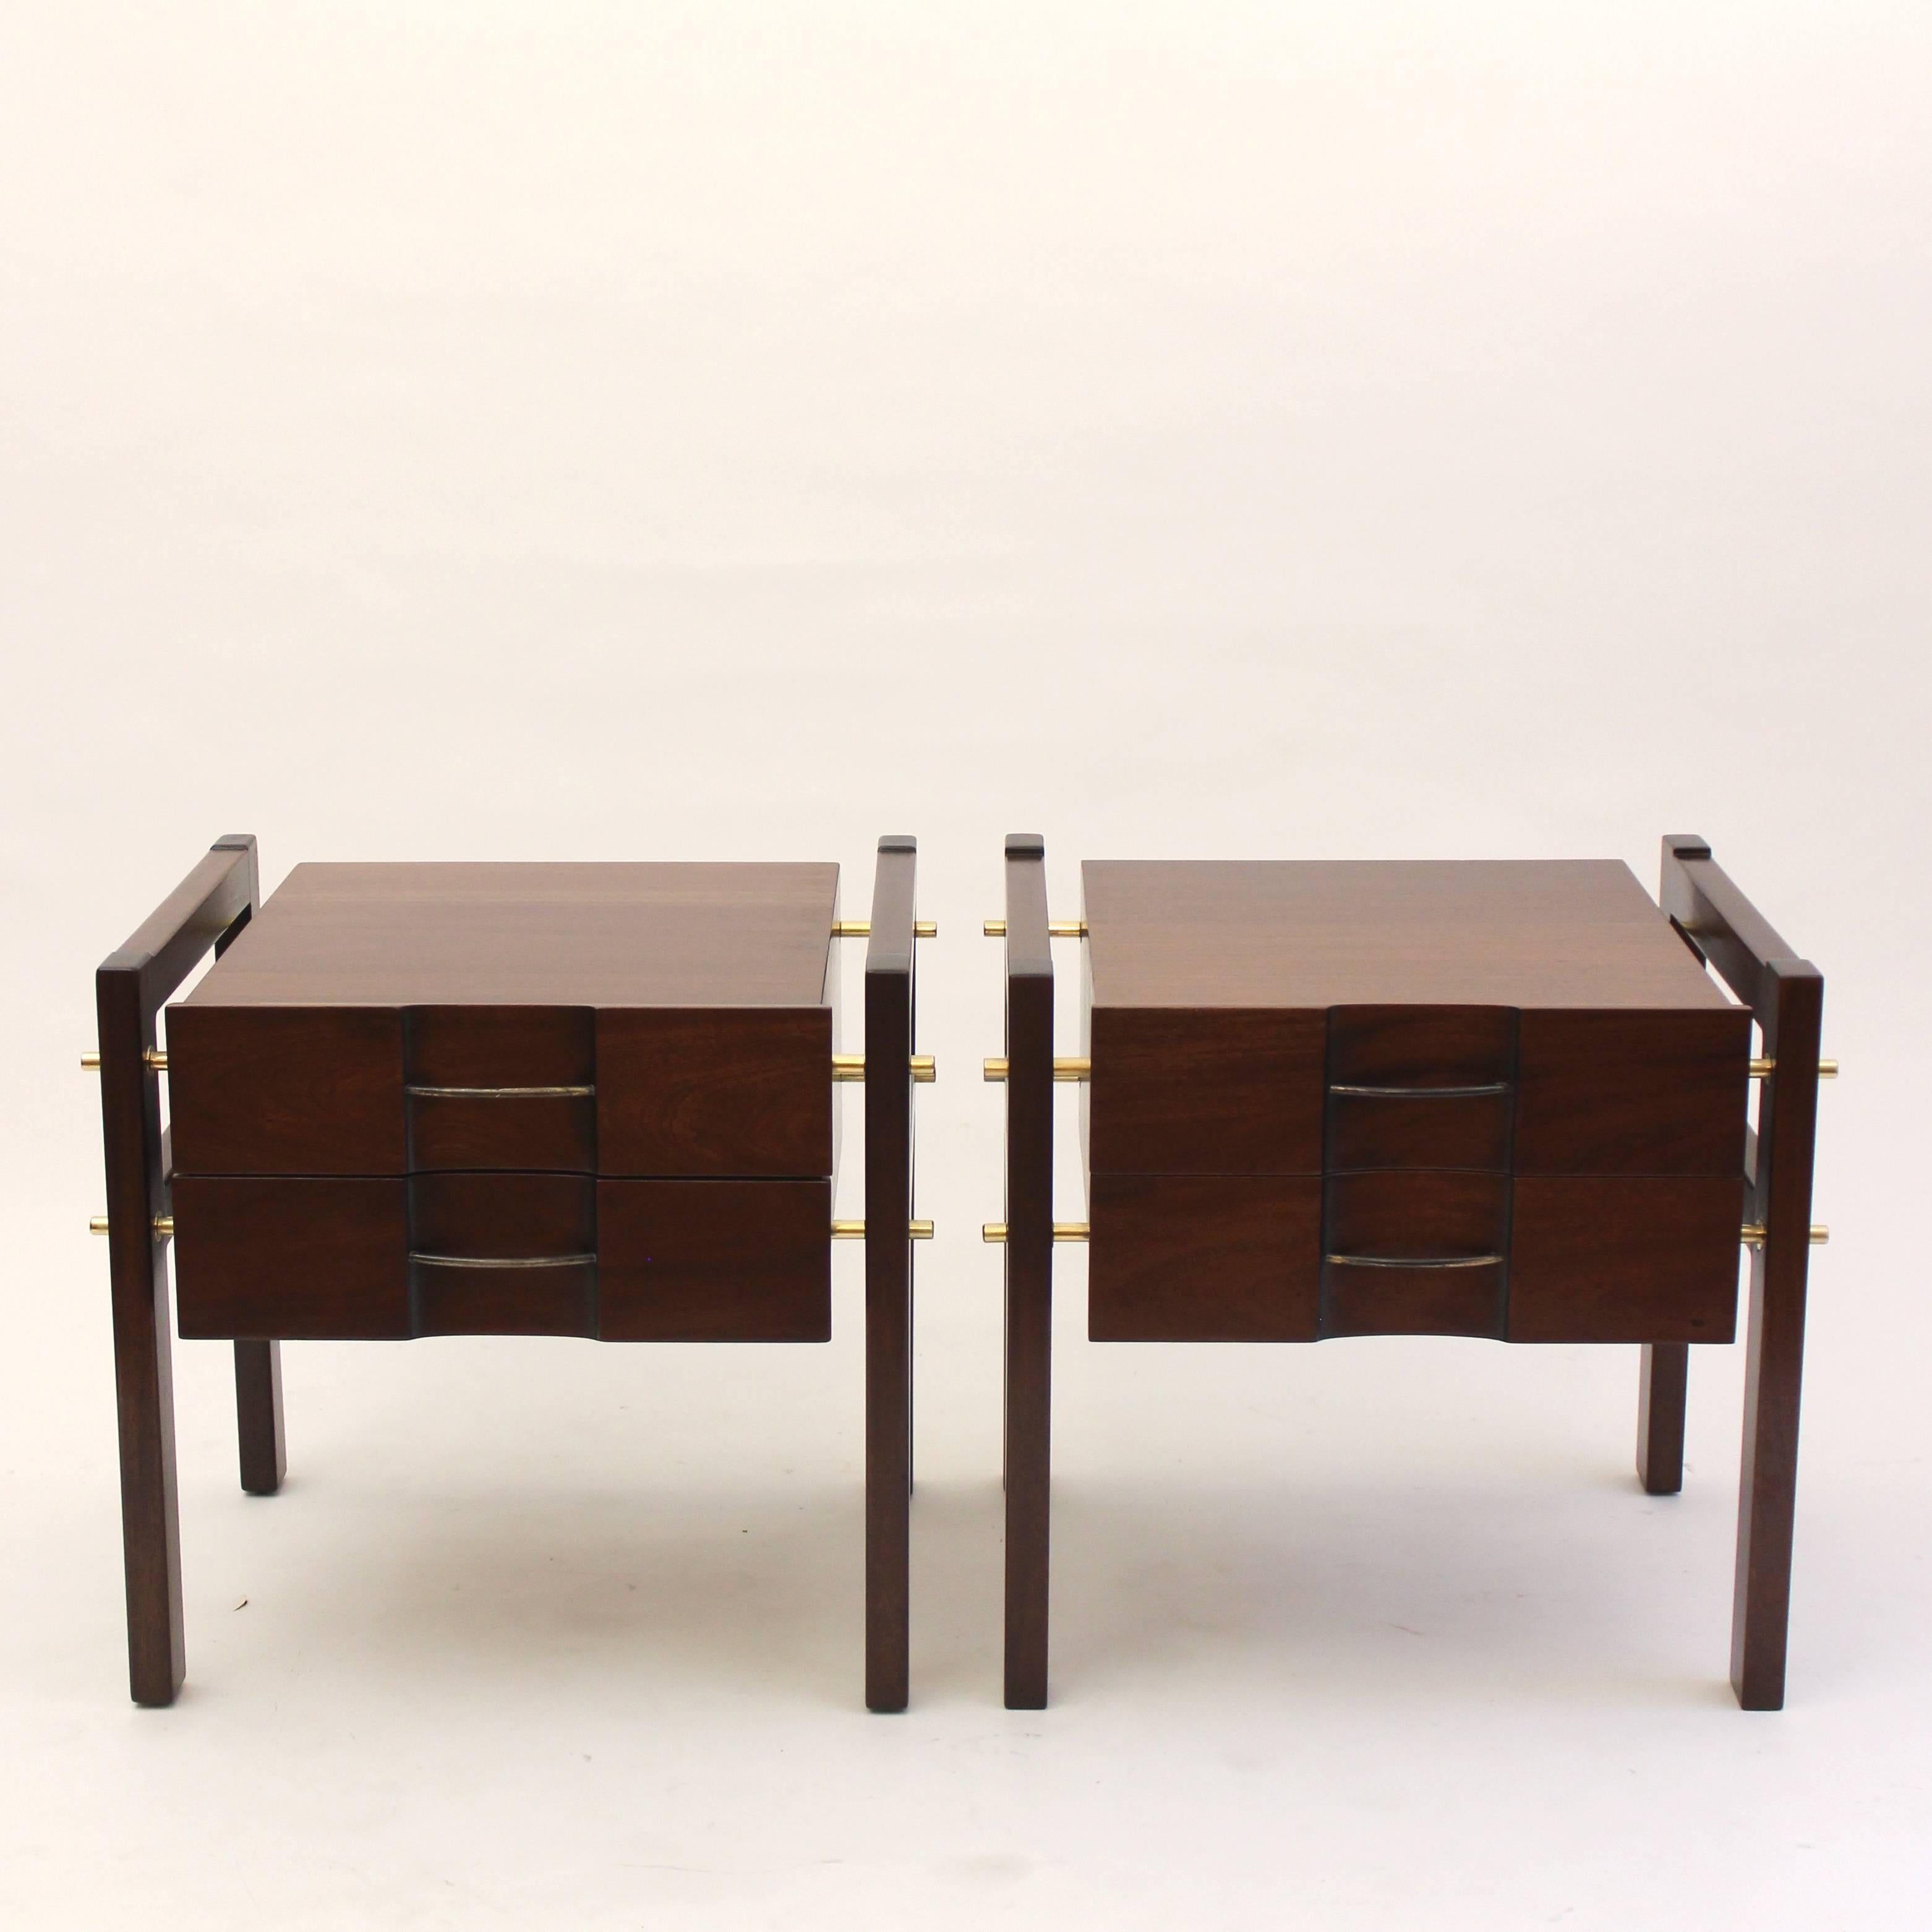 Spectacular pair of solid Mid-Century nightstands, designed by Edmond Spence and labeled 